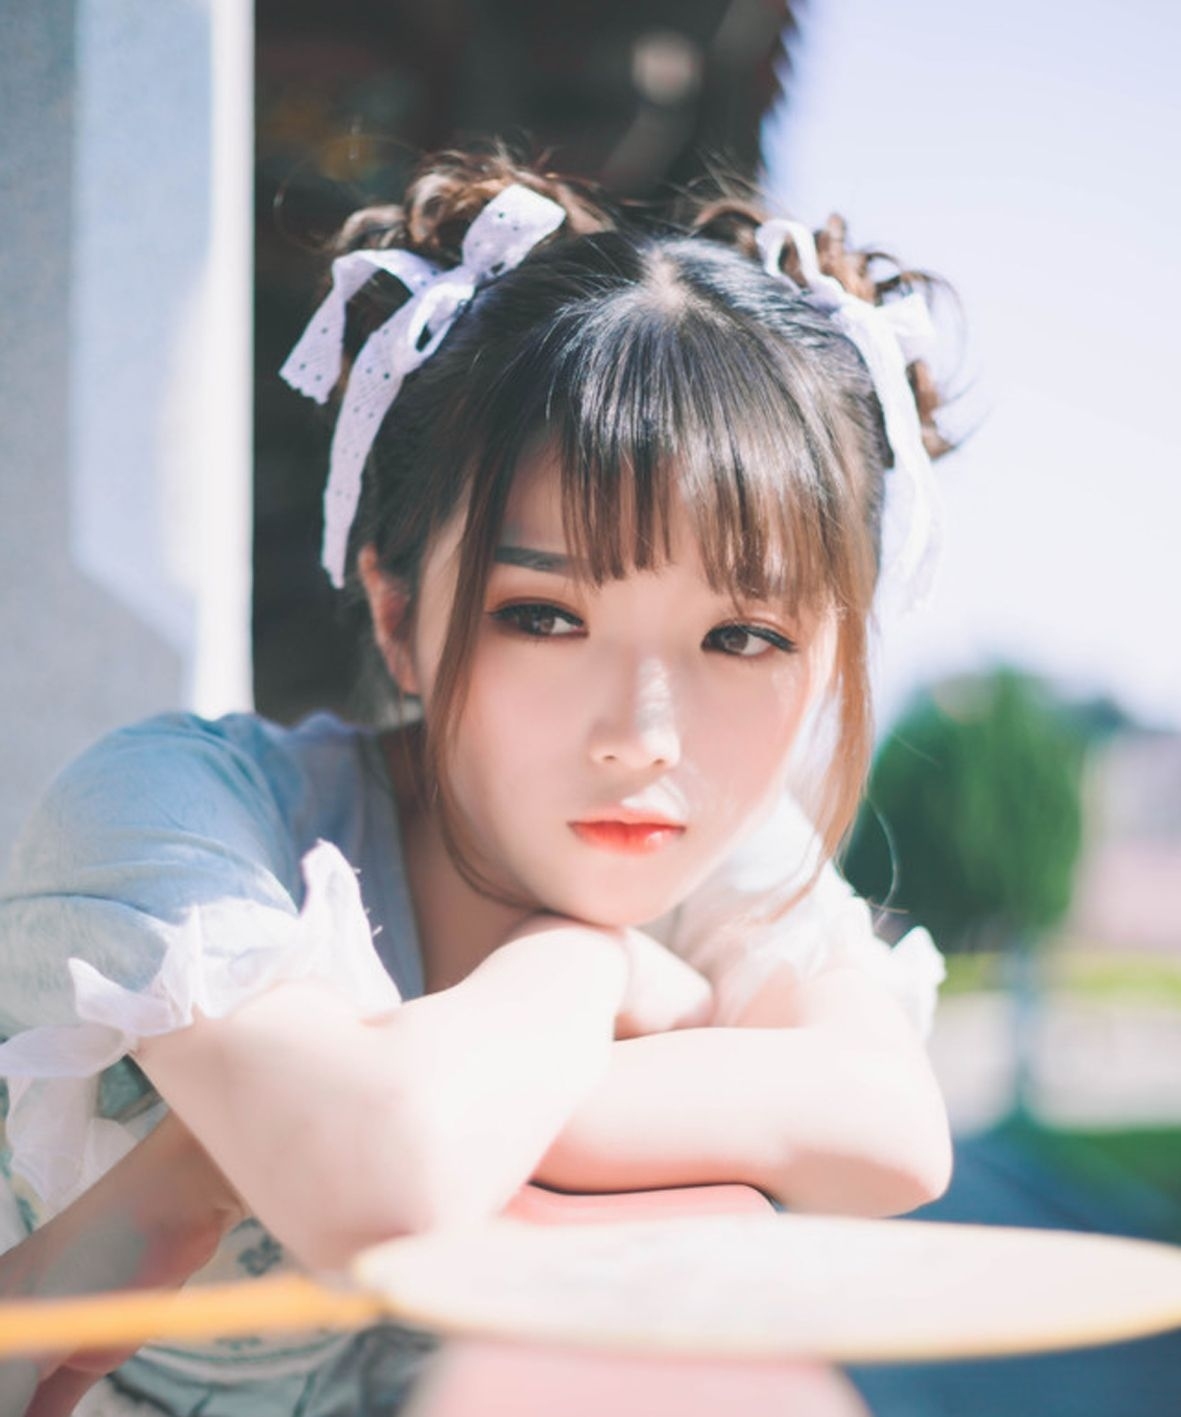 Image Result For Japanese Cute Hairstyle | Shoot Ideas | Kawaii in Superb Asian Girl Hairstyles With Bangs